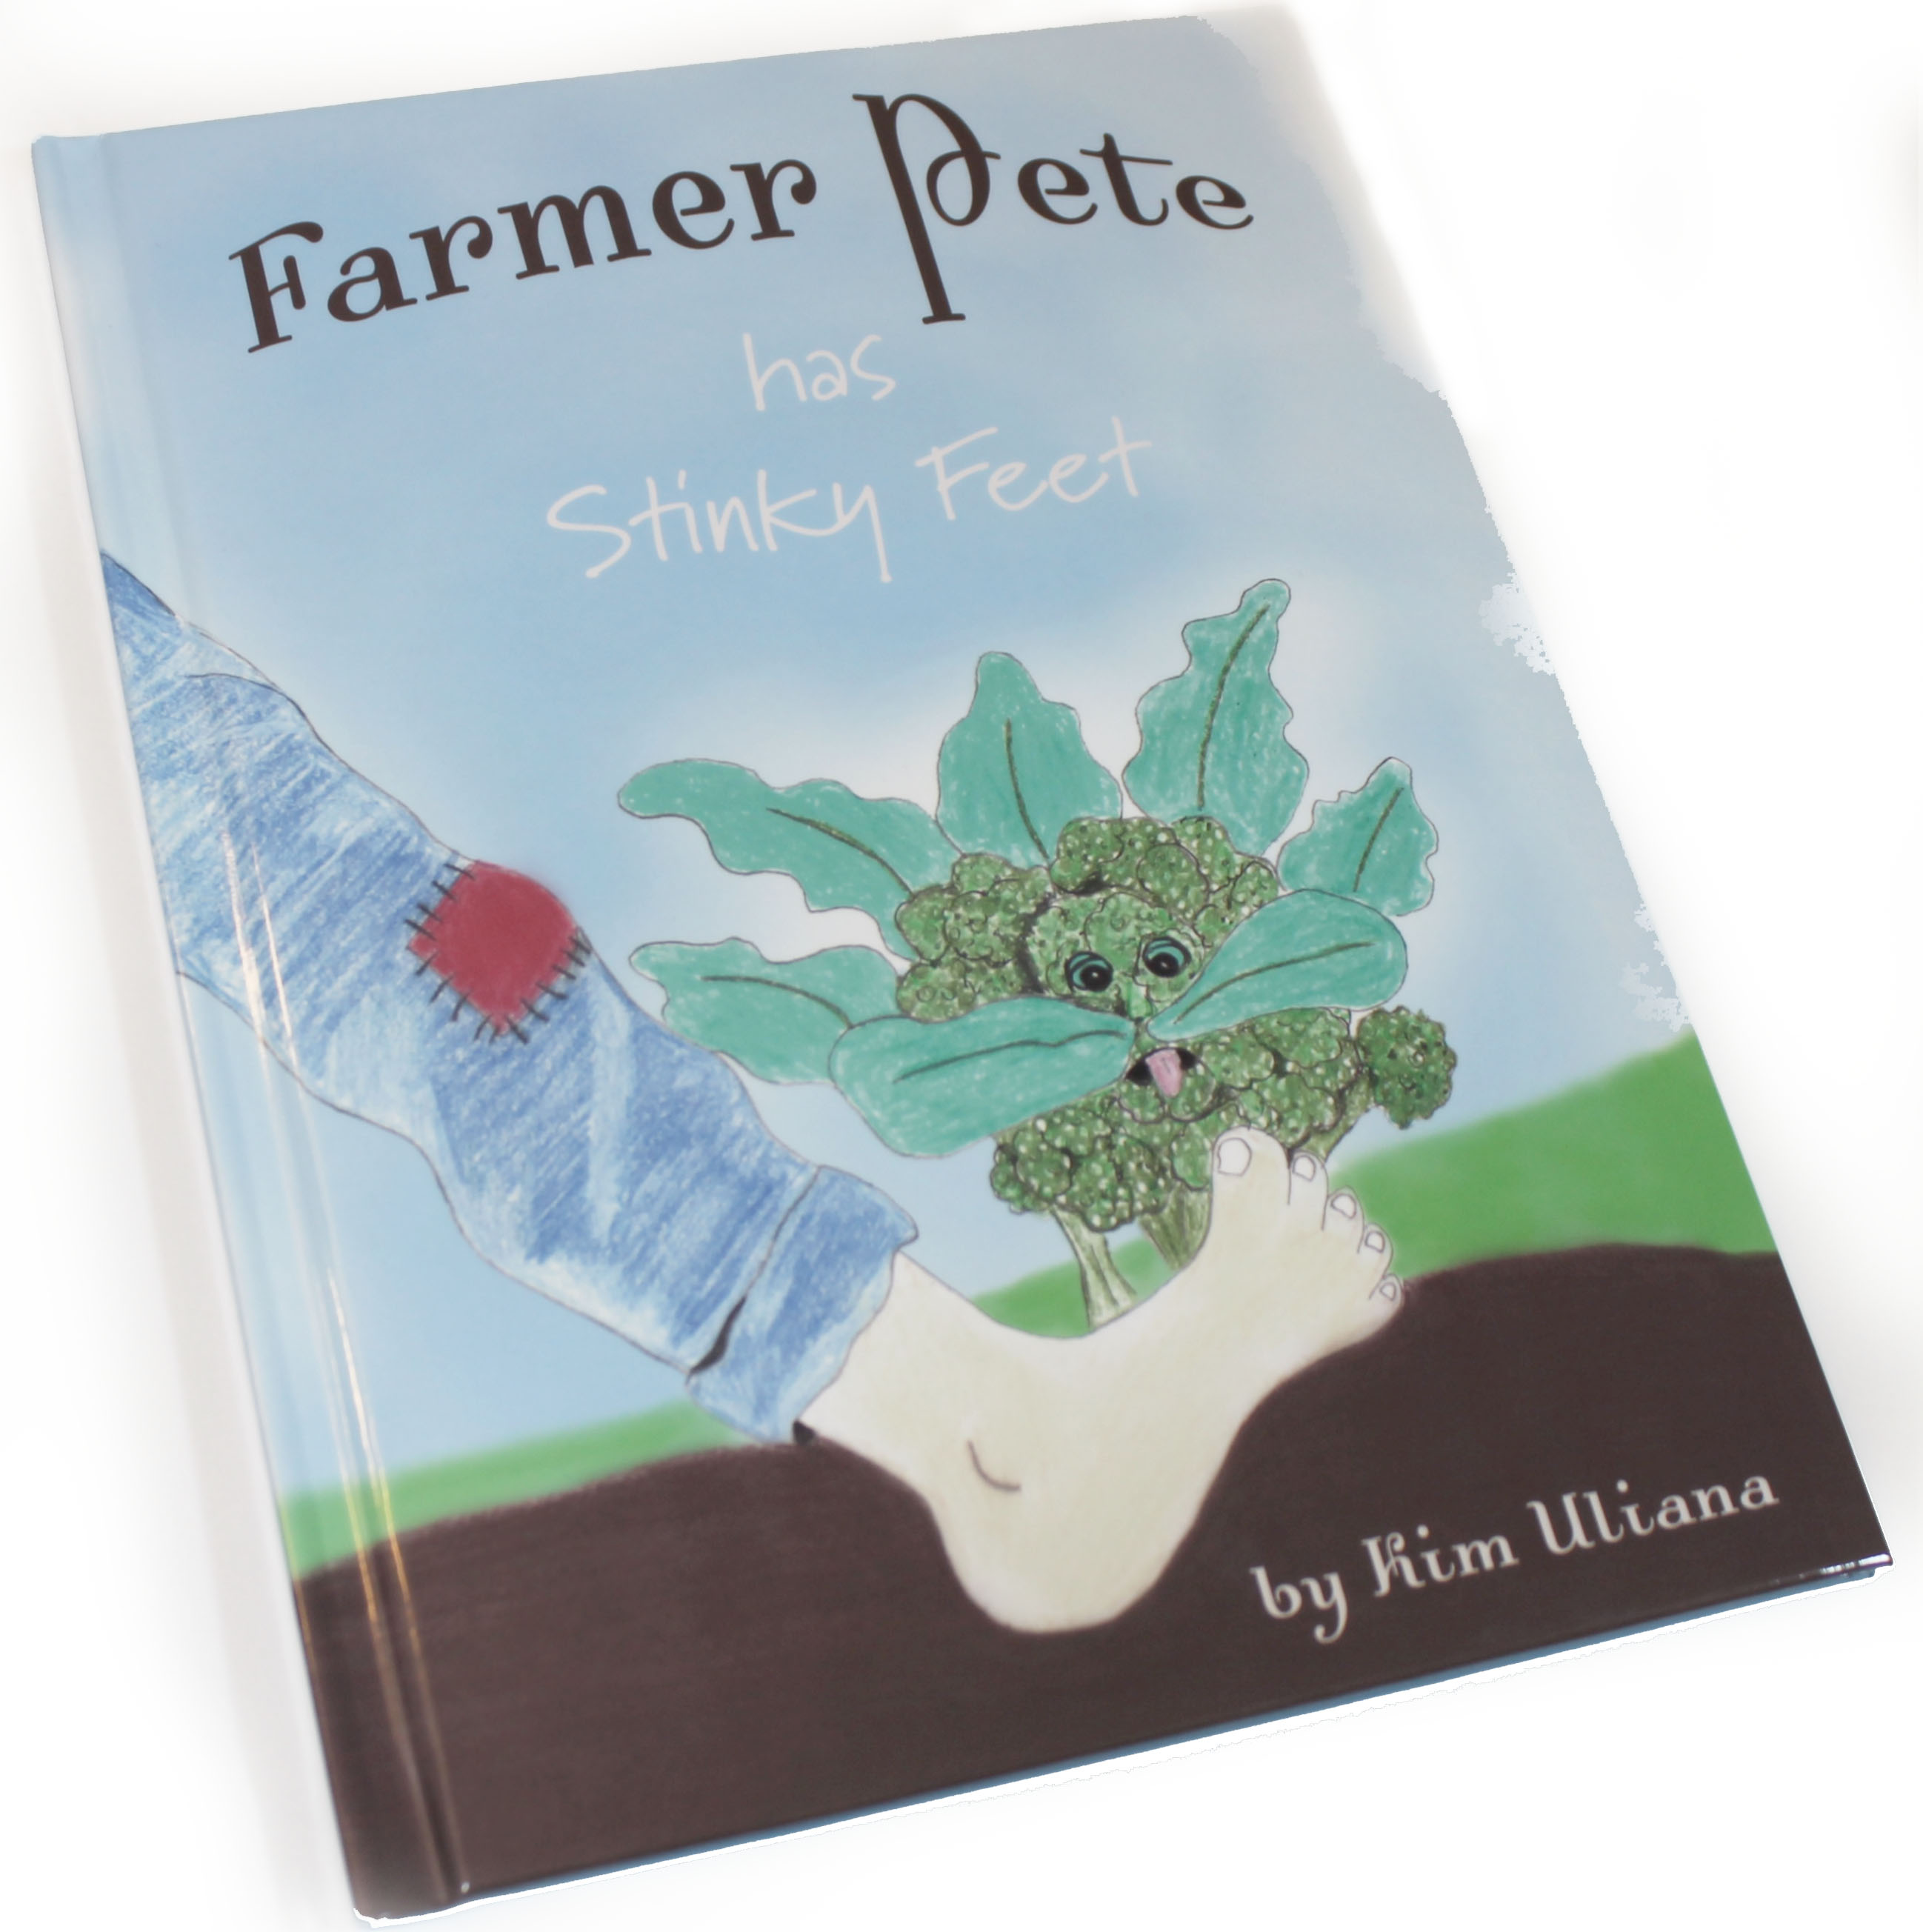 Farmer Pete Has Stinky Feet by Kim Uliana is a cute, funny and educational book filled with silly puns and adorable illustrations.